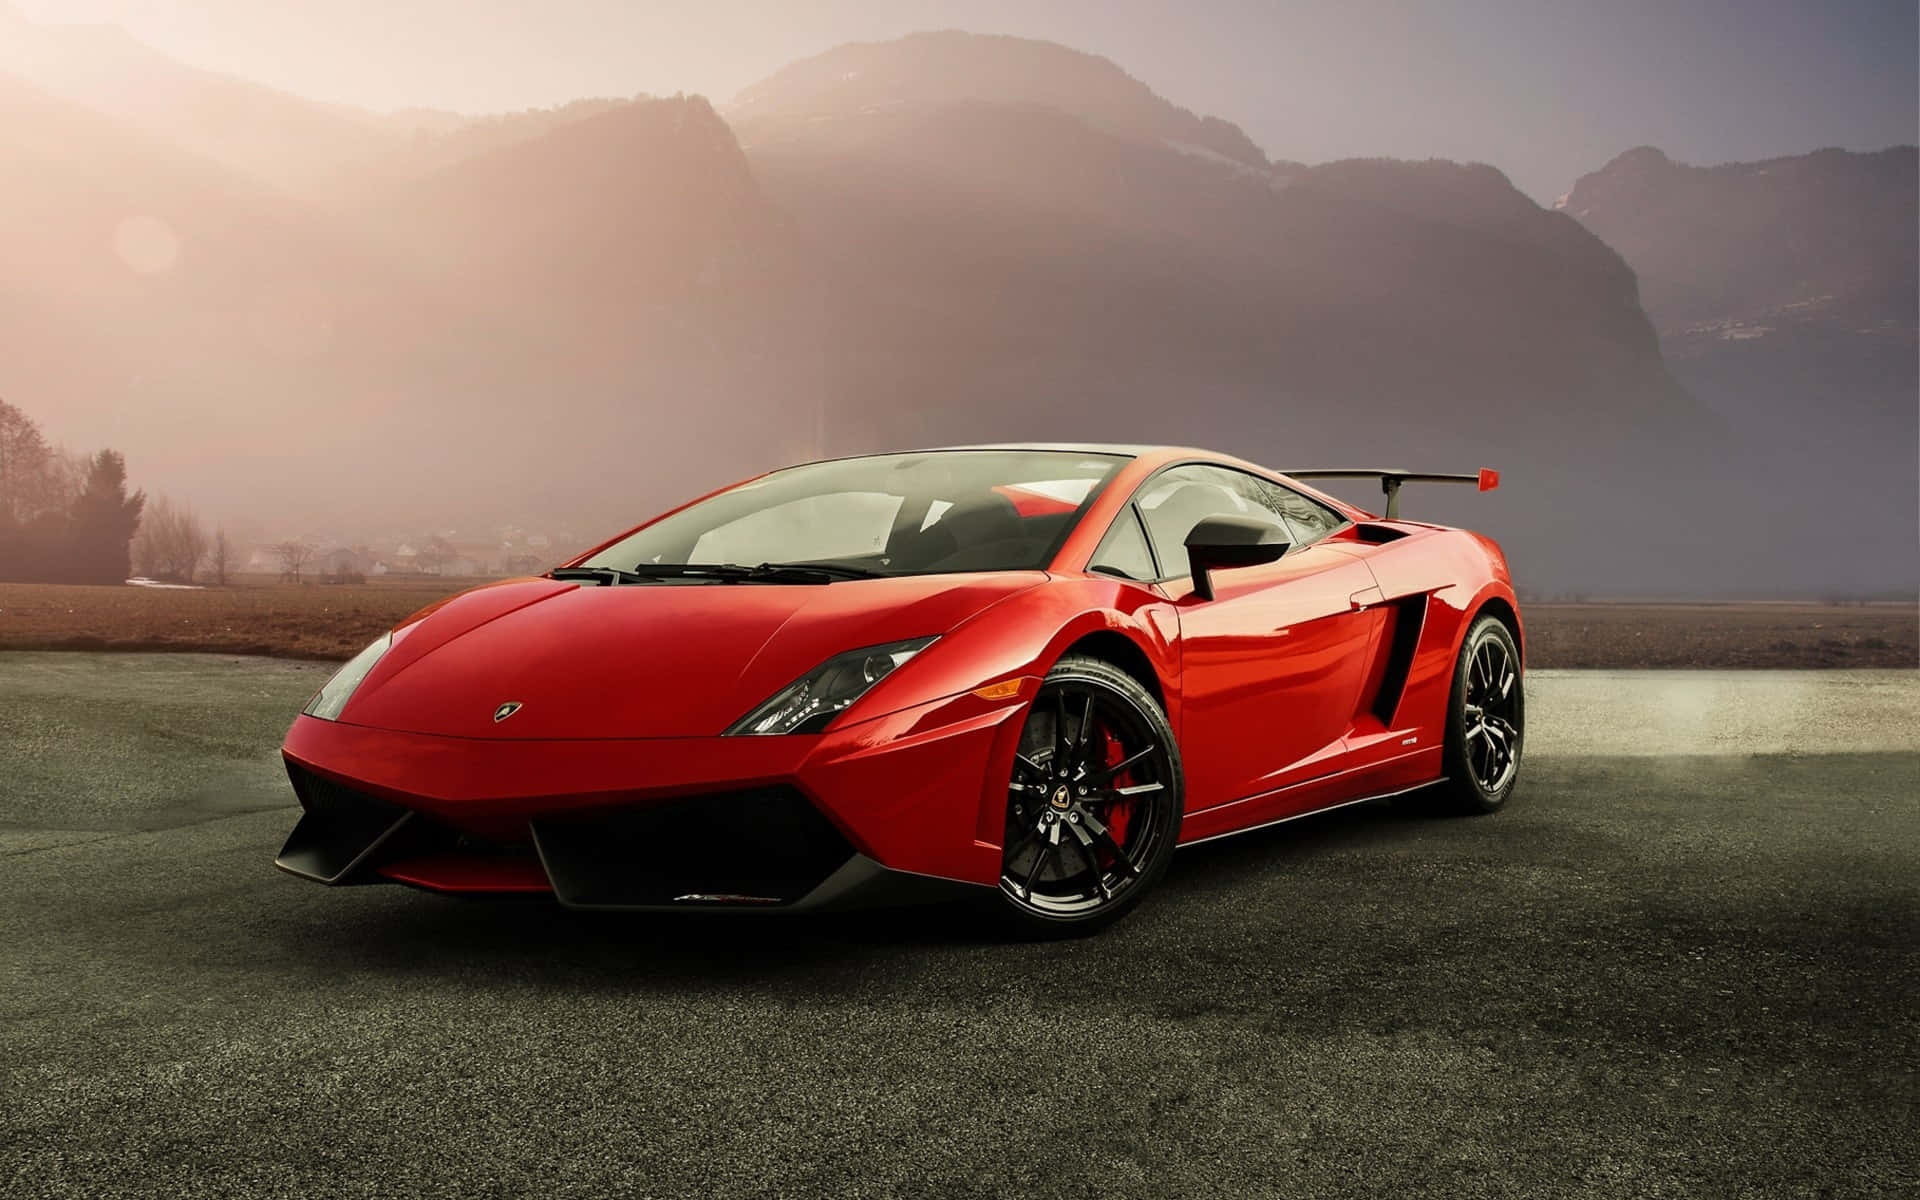 Fast Car  LIVE Wallpaper  Wallpapers Central